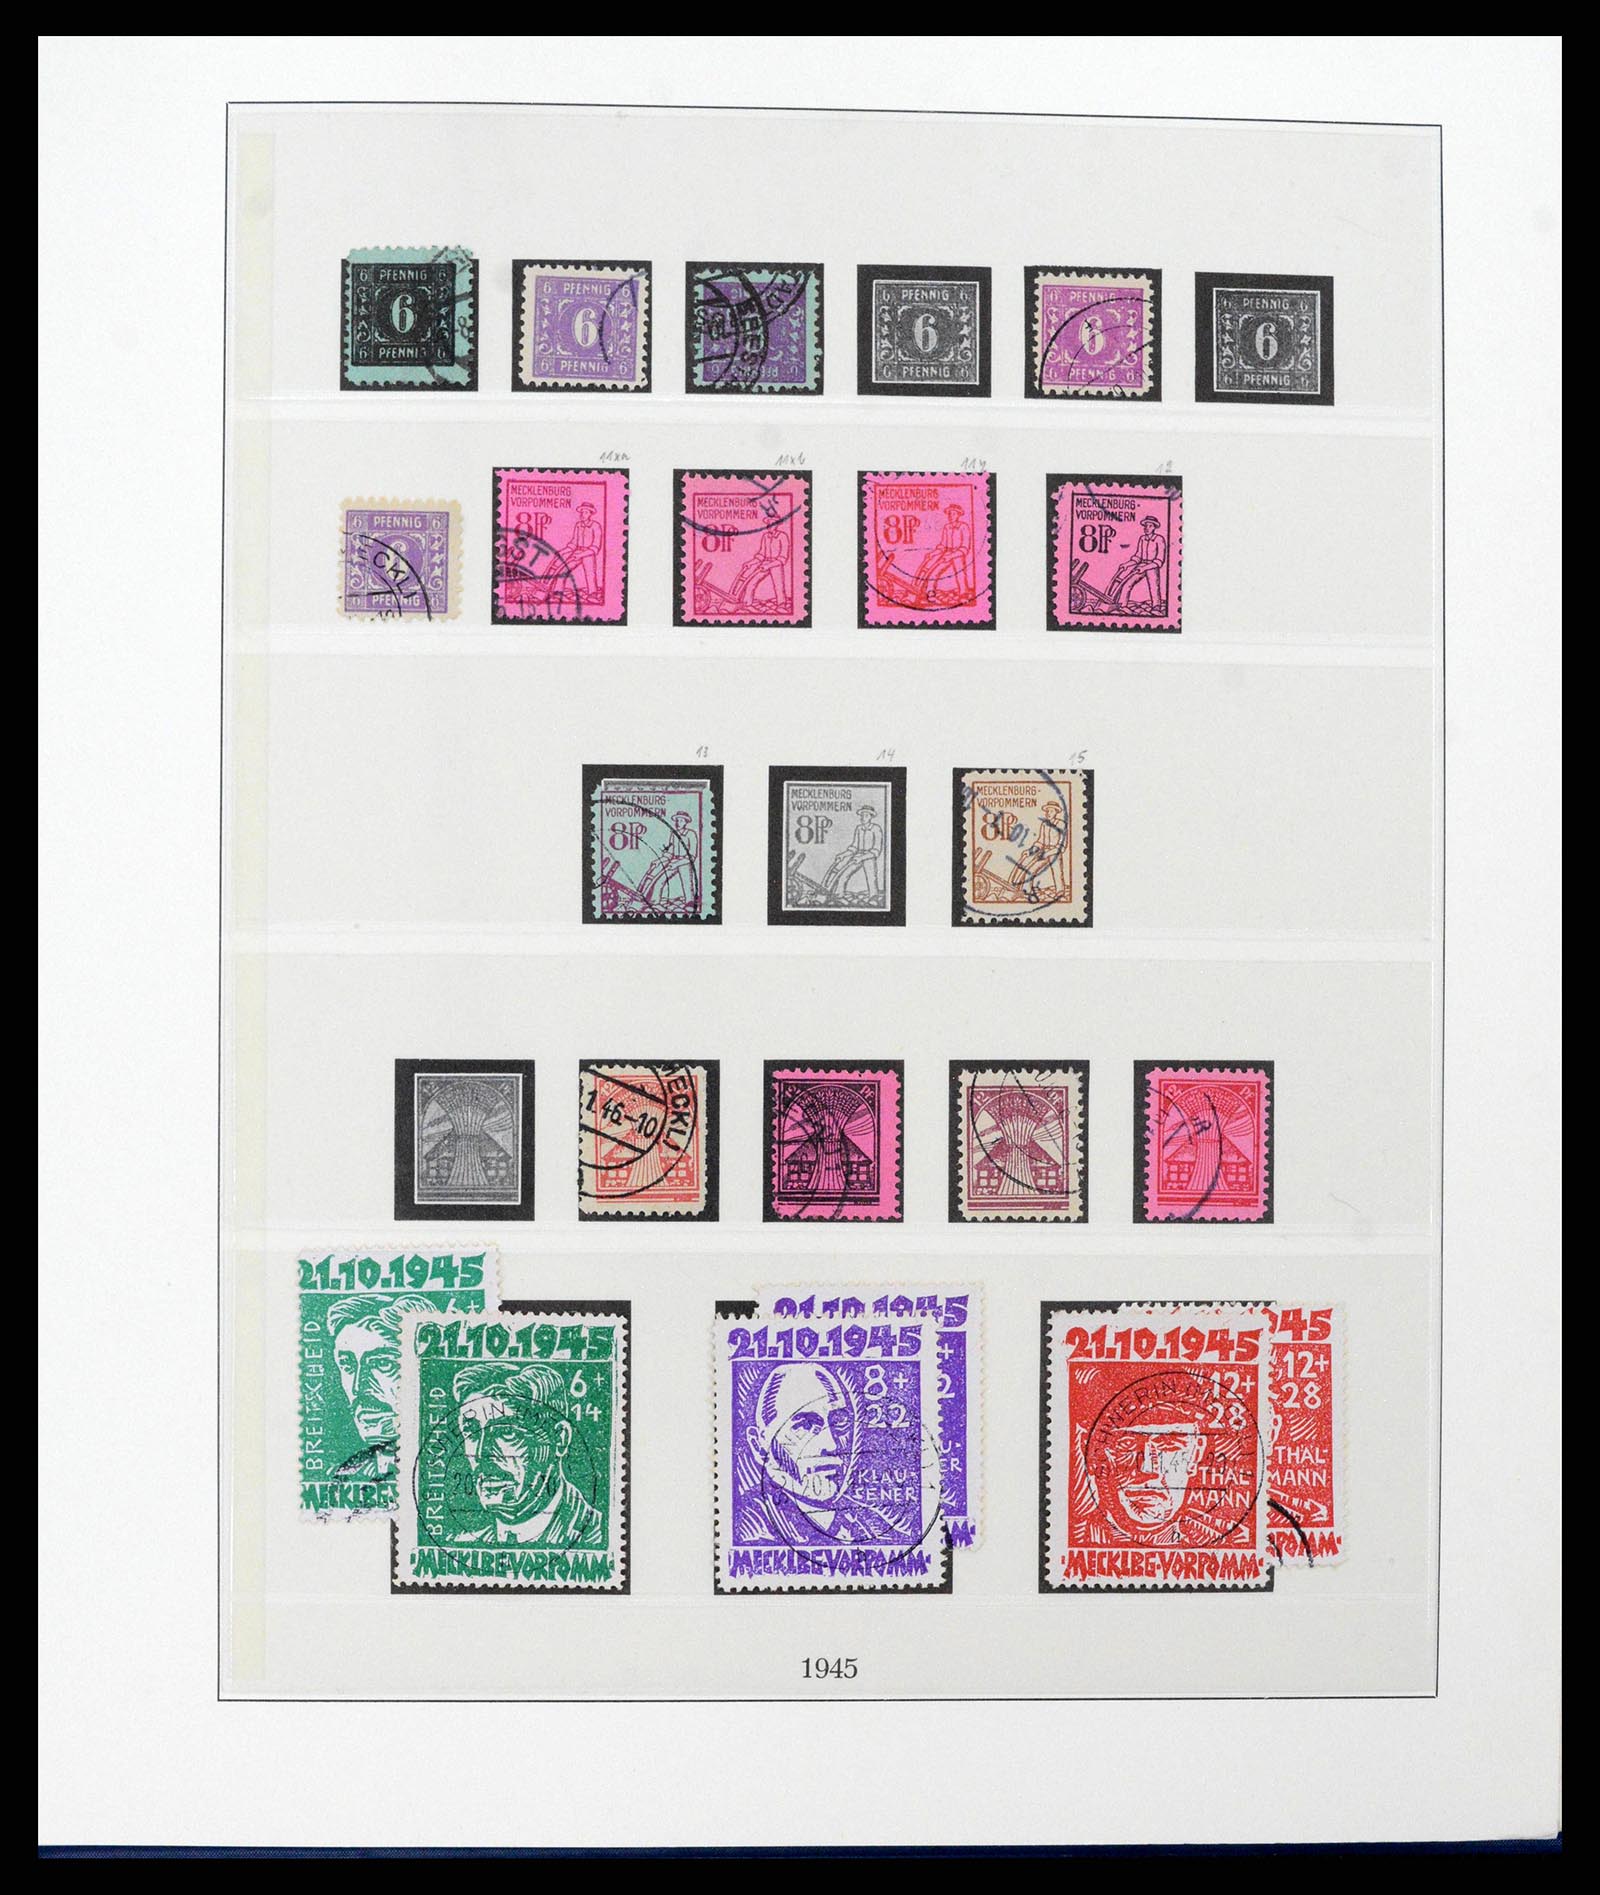 38890 0004 - Stamp collection 38890 Germany sovjet zone 1945-1949.